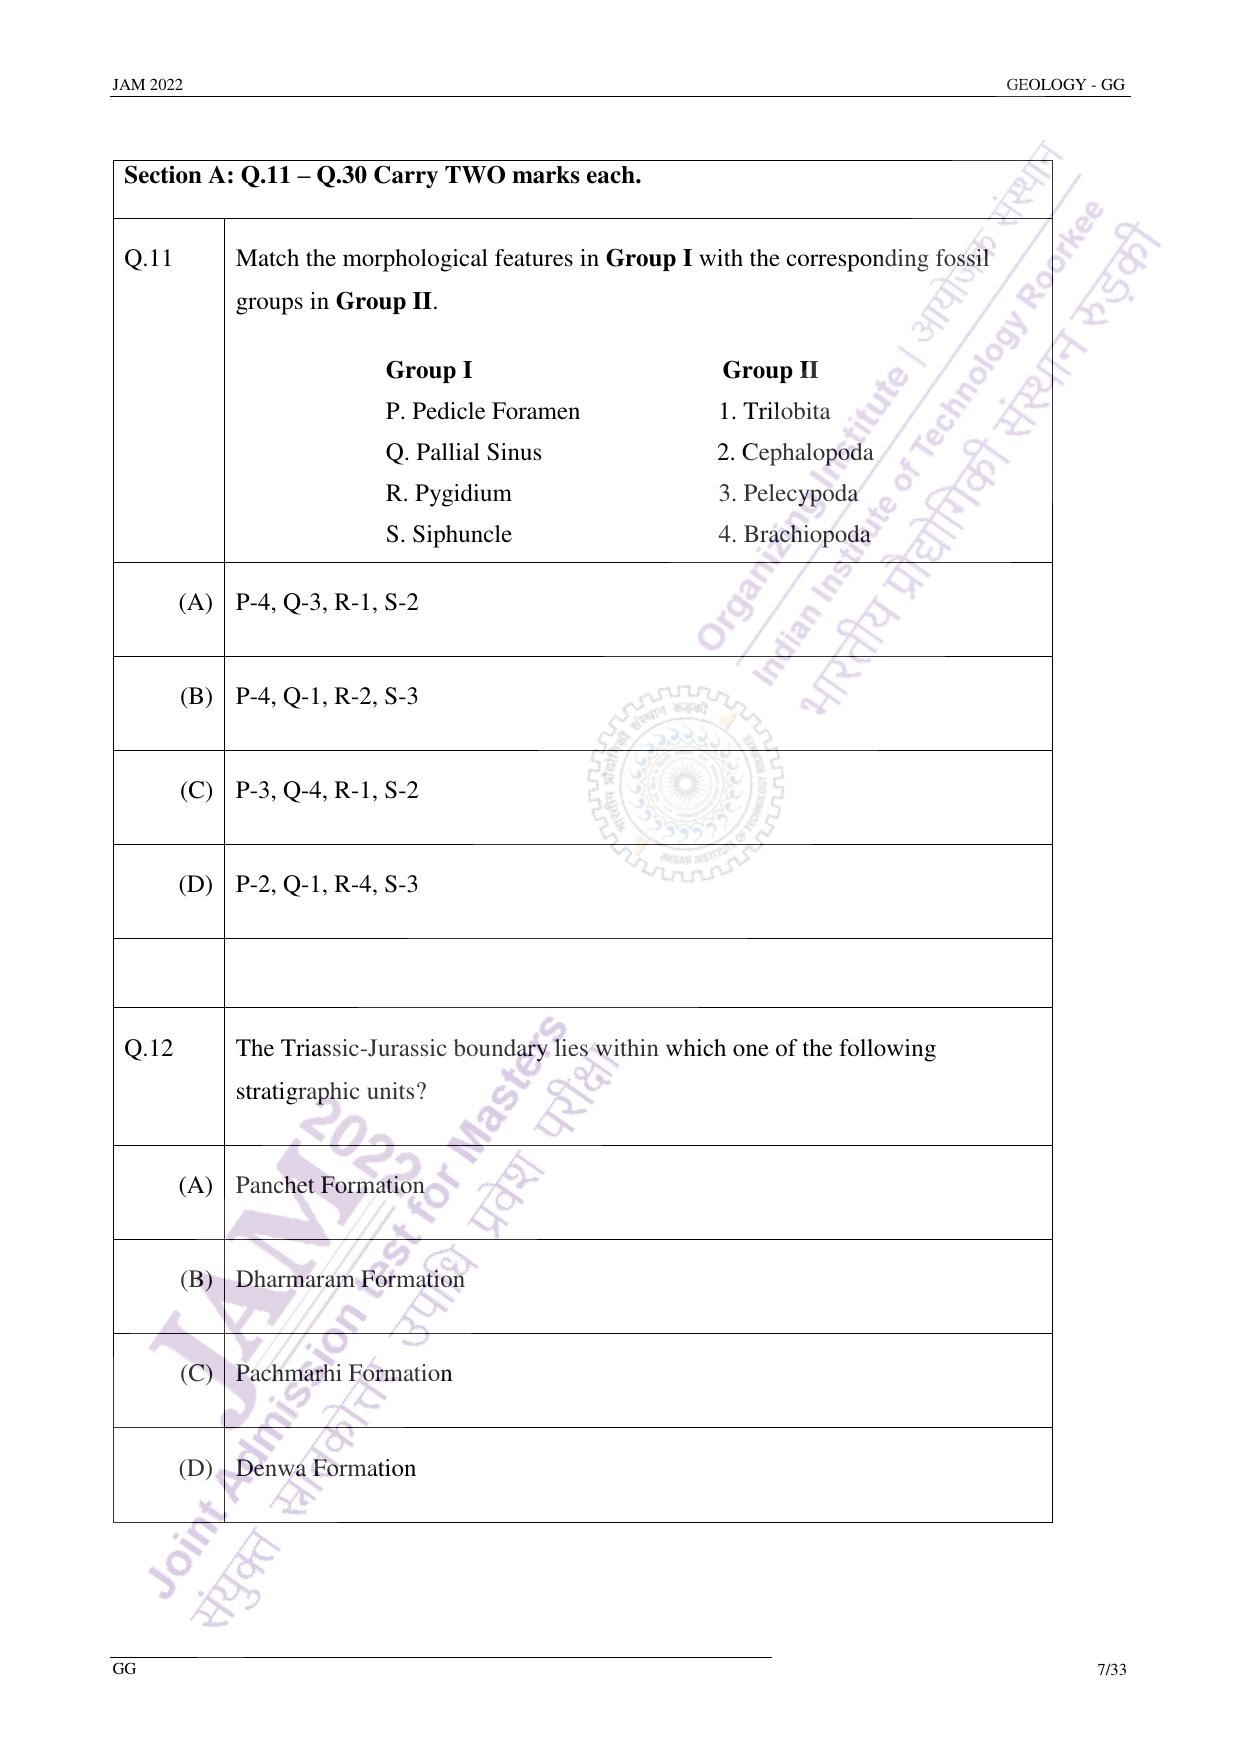 JAM 2022: GG Question Paper - Page 6